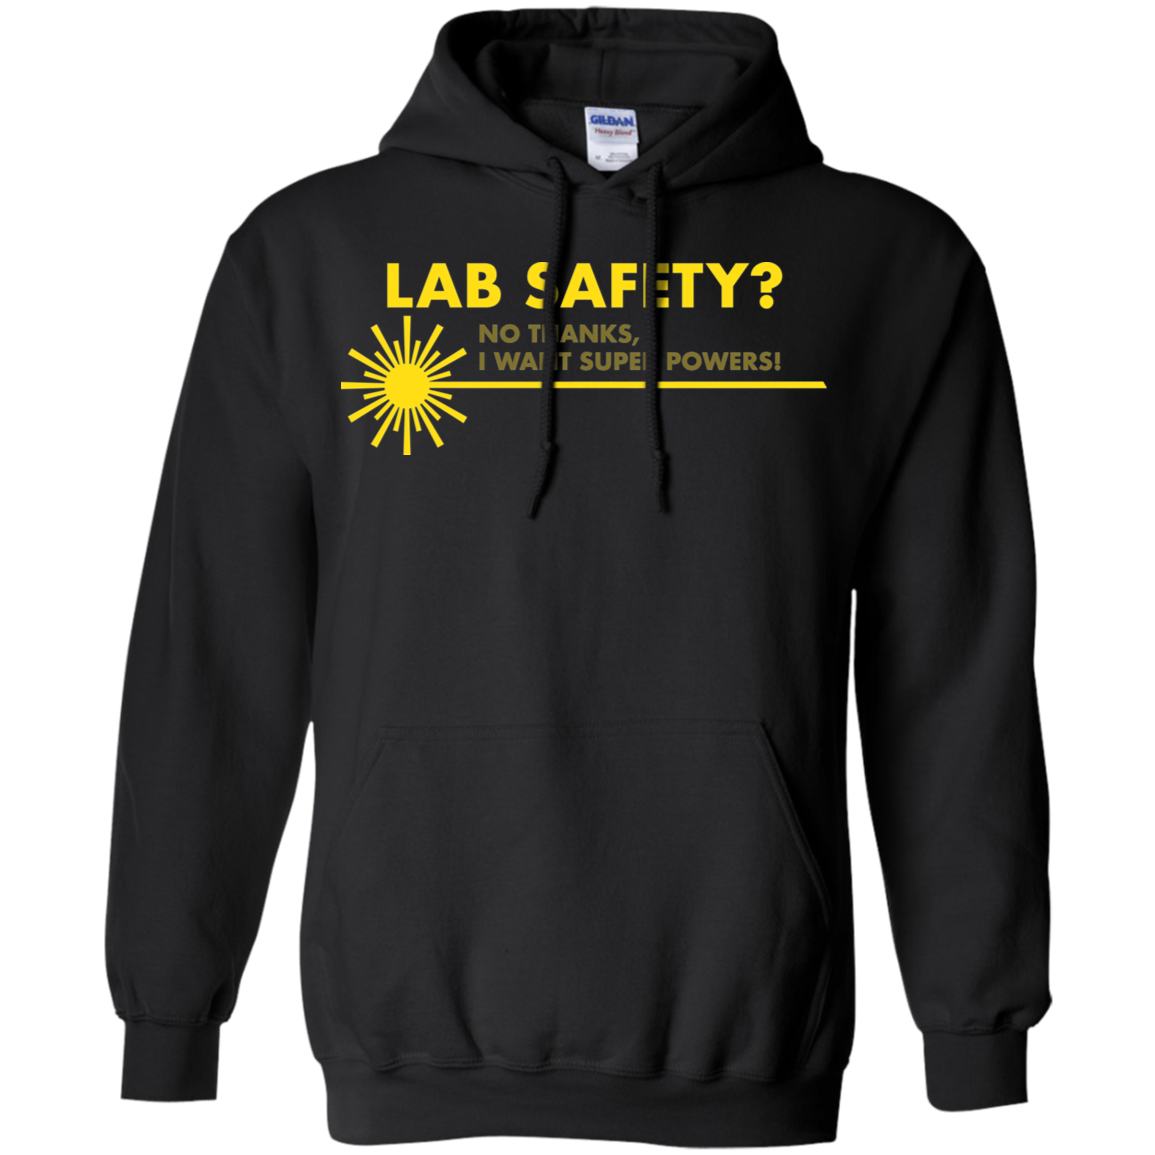 Screw Lab Safety I Want Superpowers